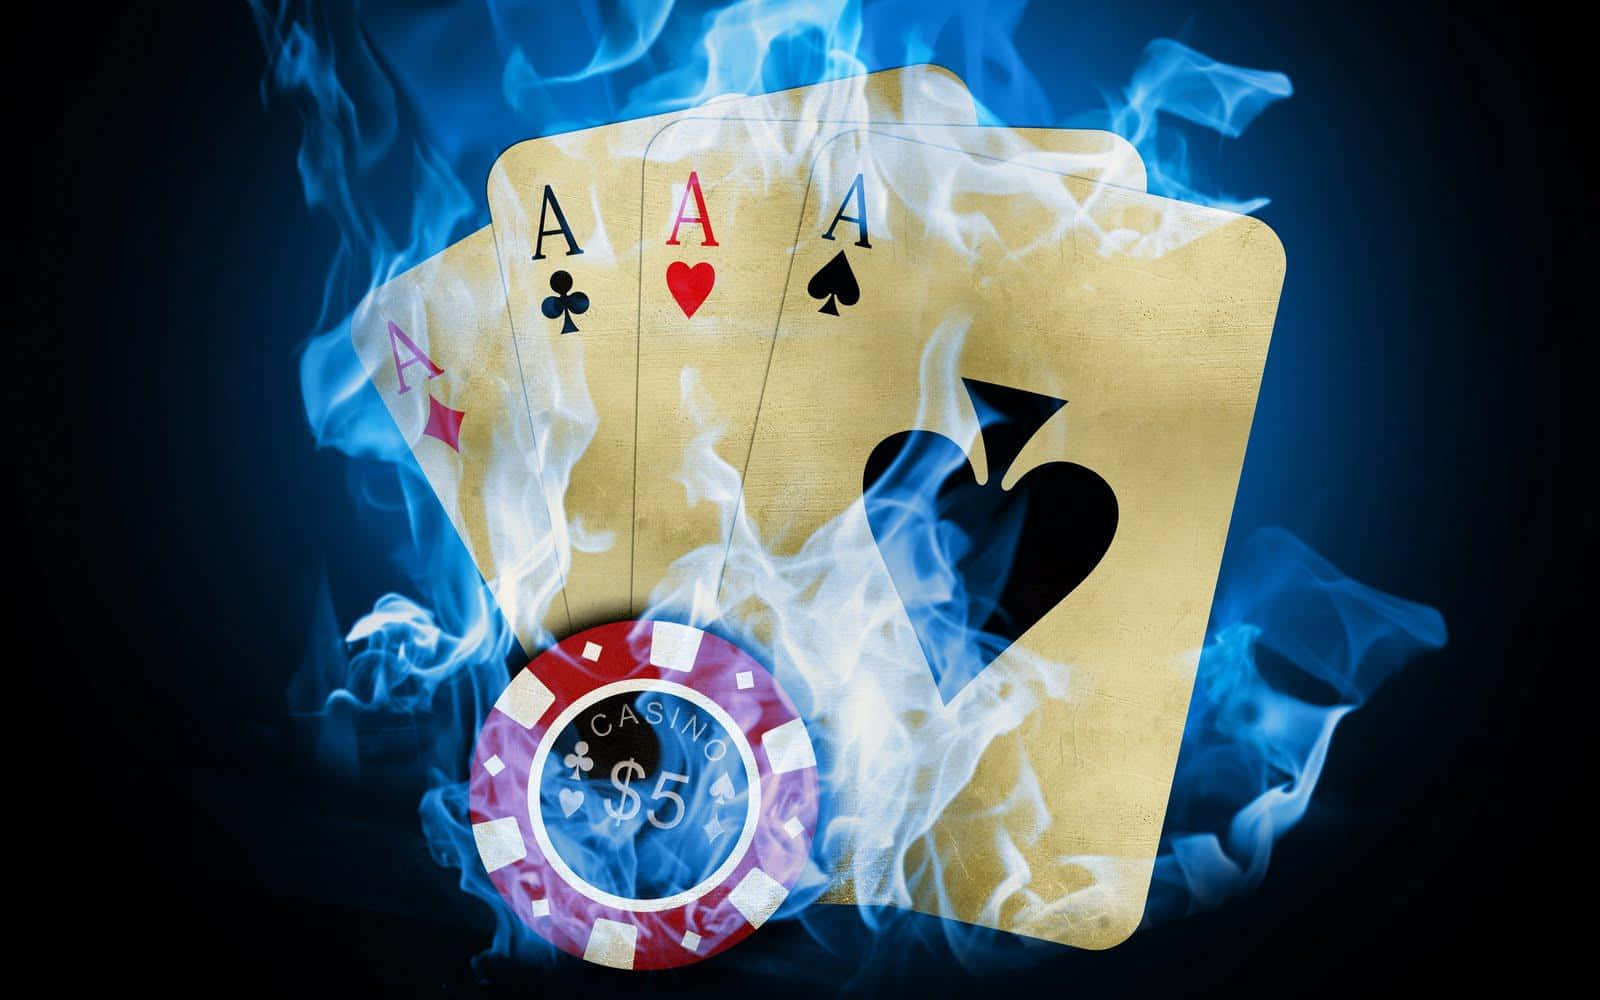 Got A Full Hand? Take On The Pro's In The Ultimate Online Poker Experience